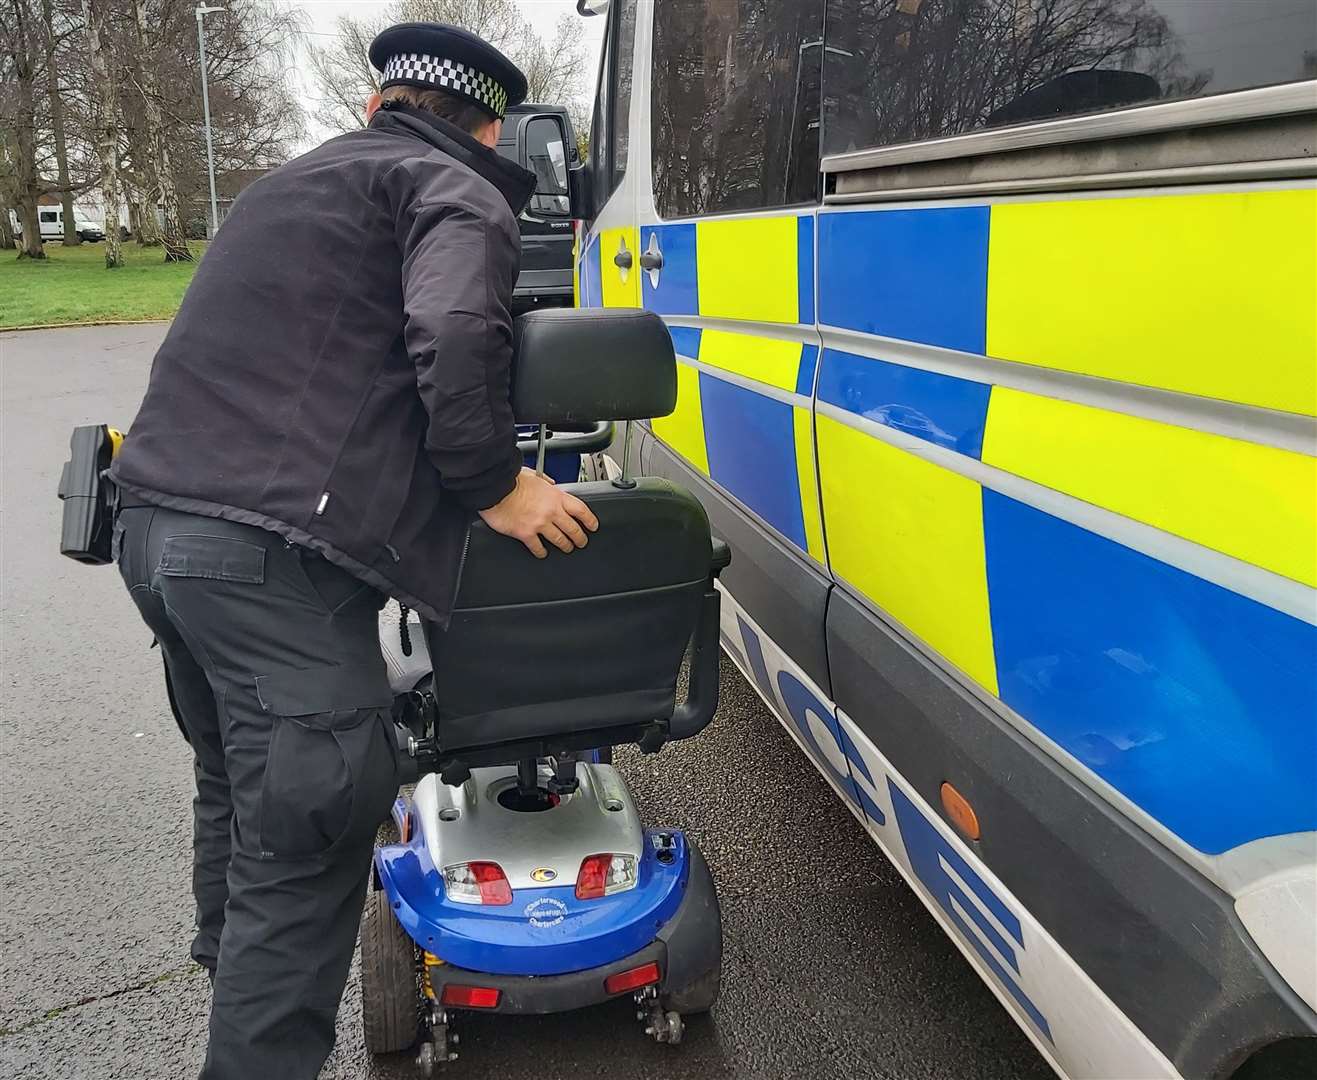 Officers reunited a pensioner with their stolen scooter. Picture: Kent Police